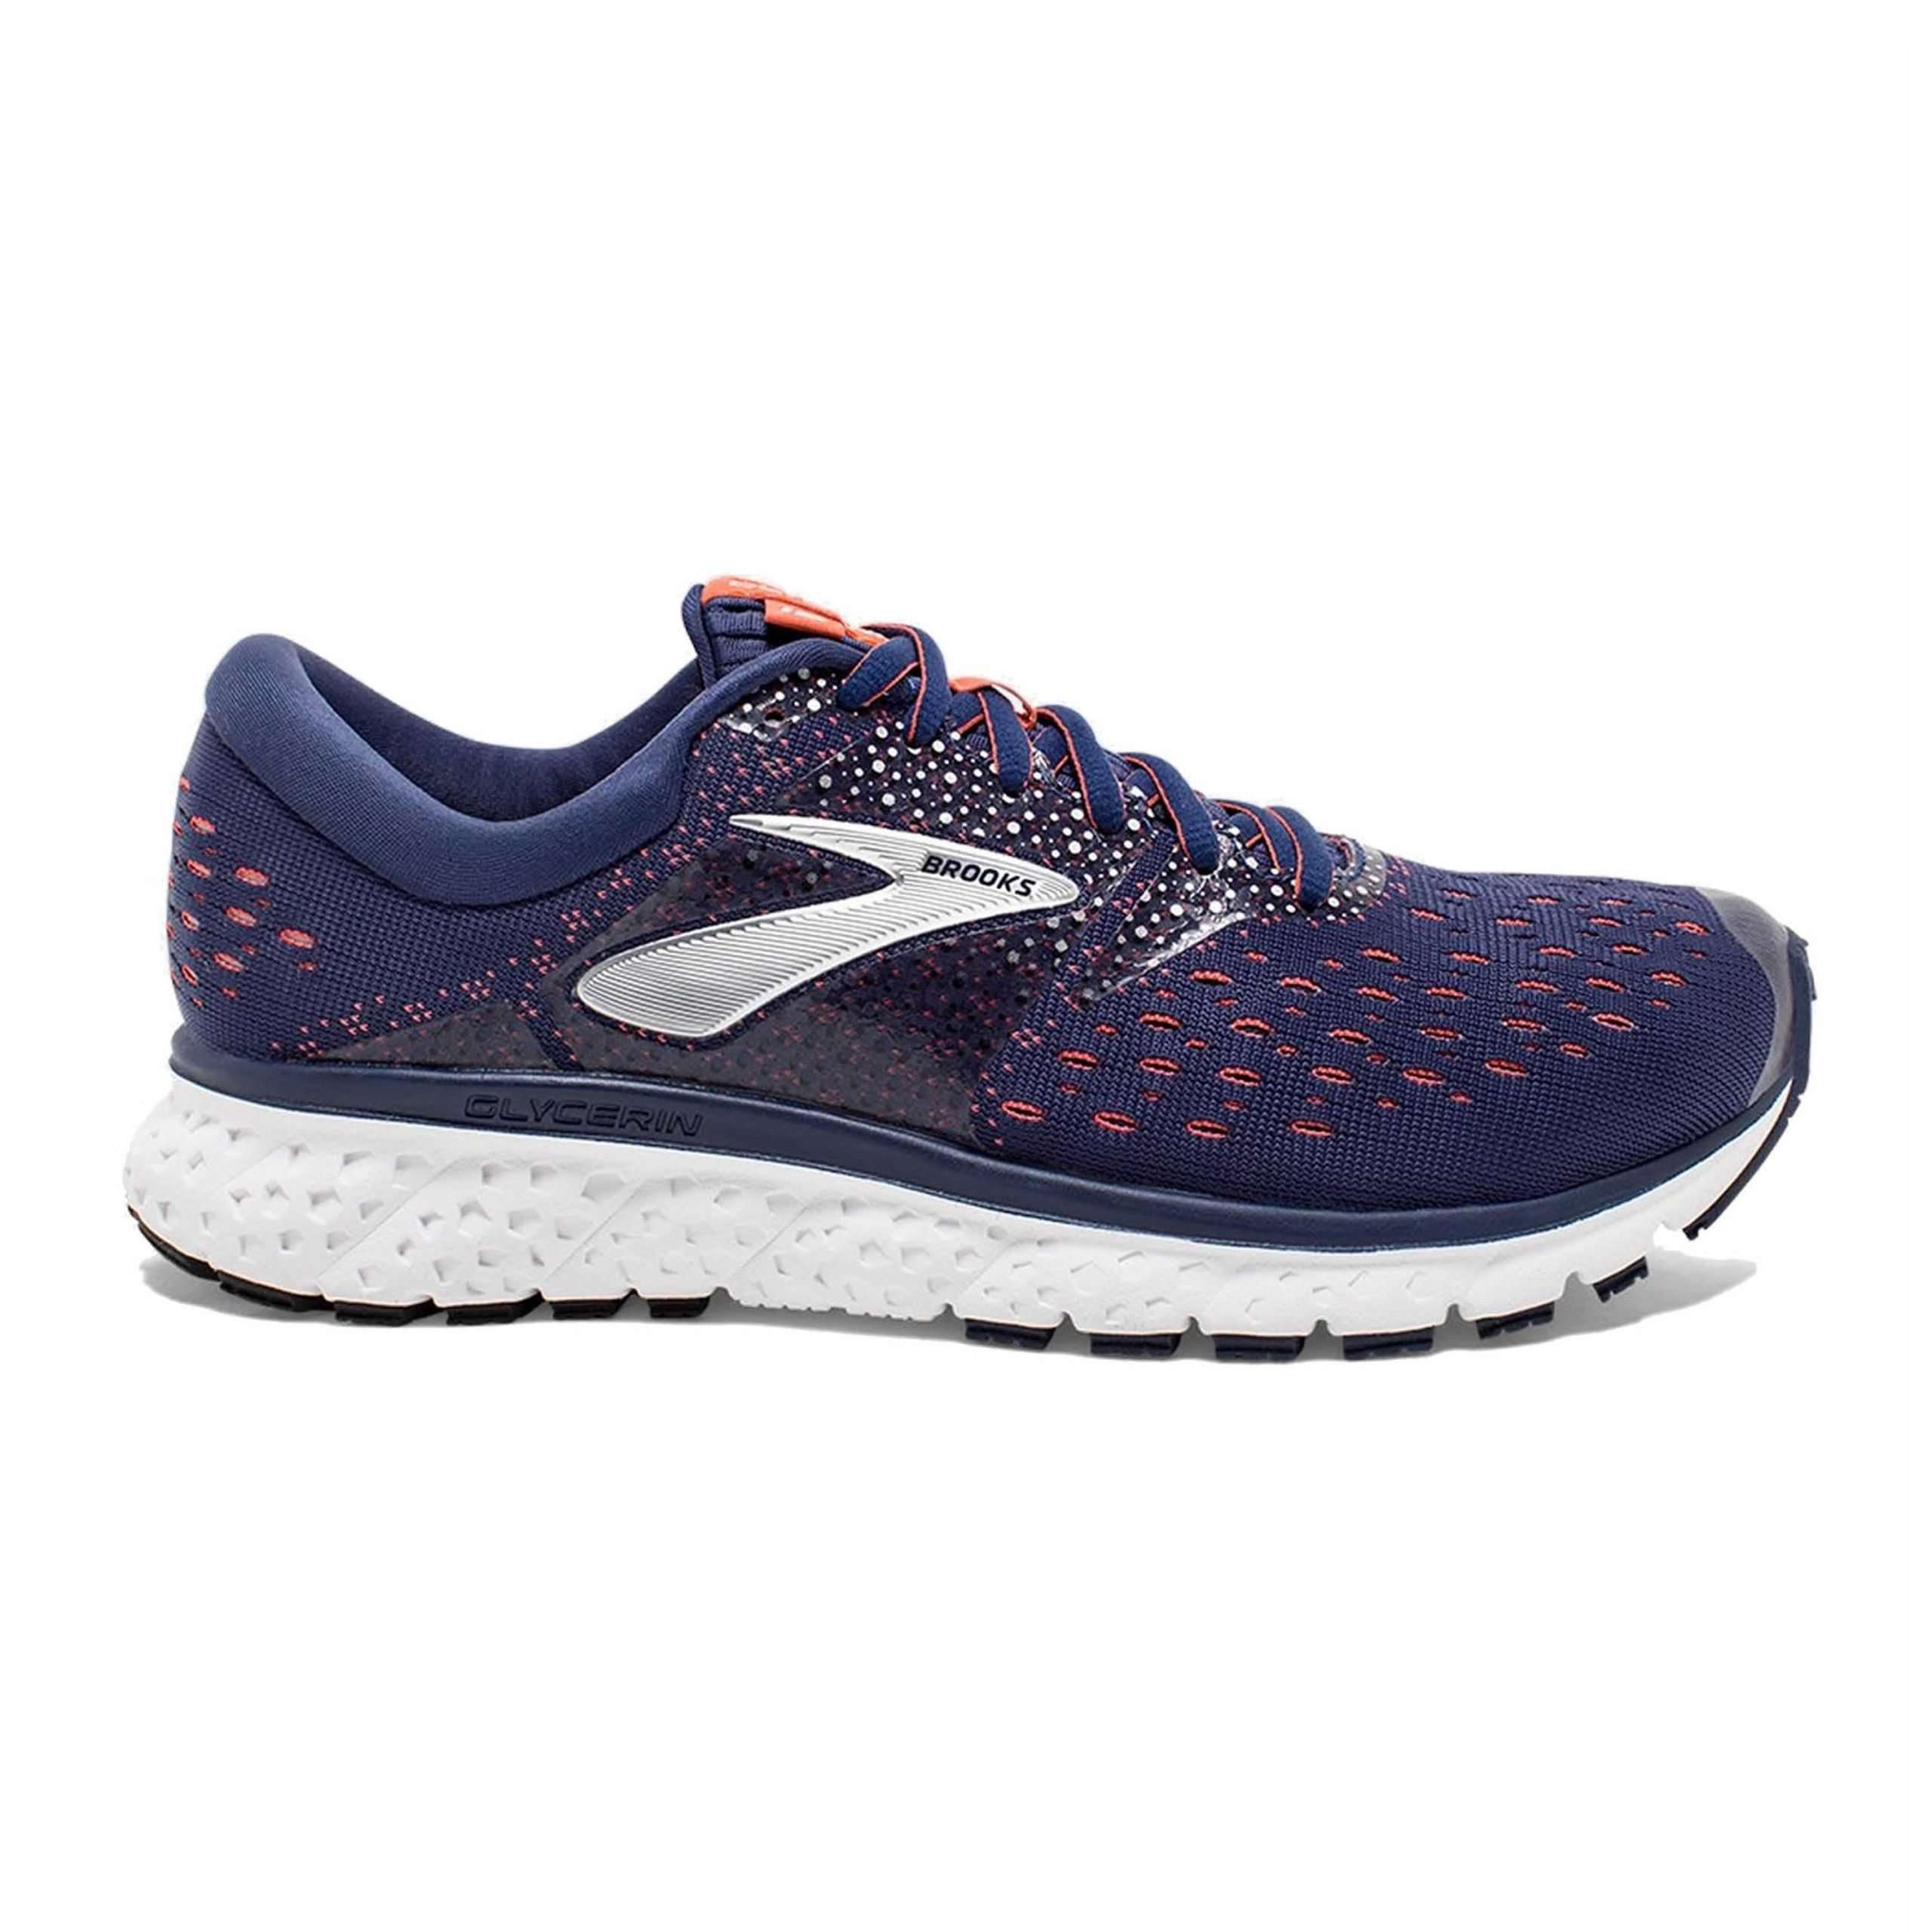 Brooks Glycerin 16 Road Running Shoes in Blue